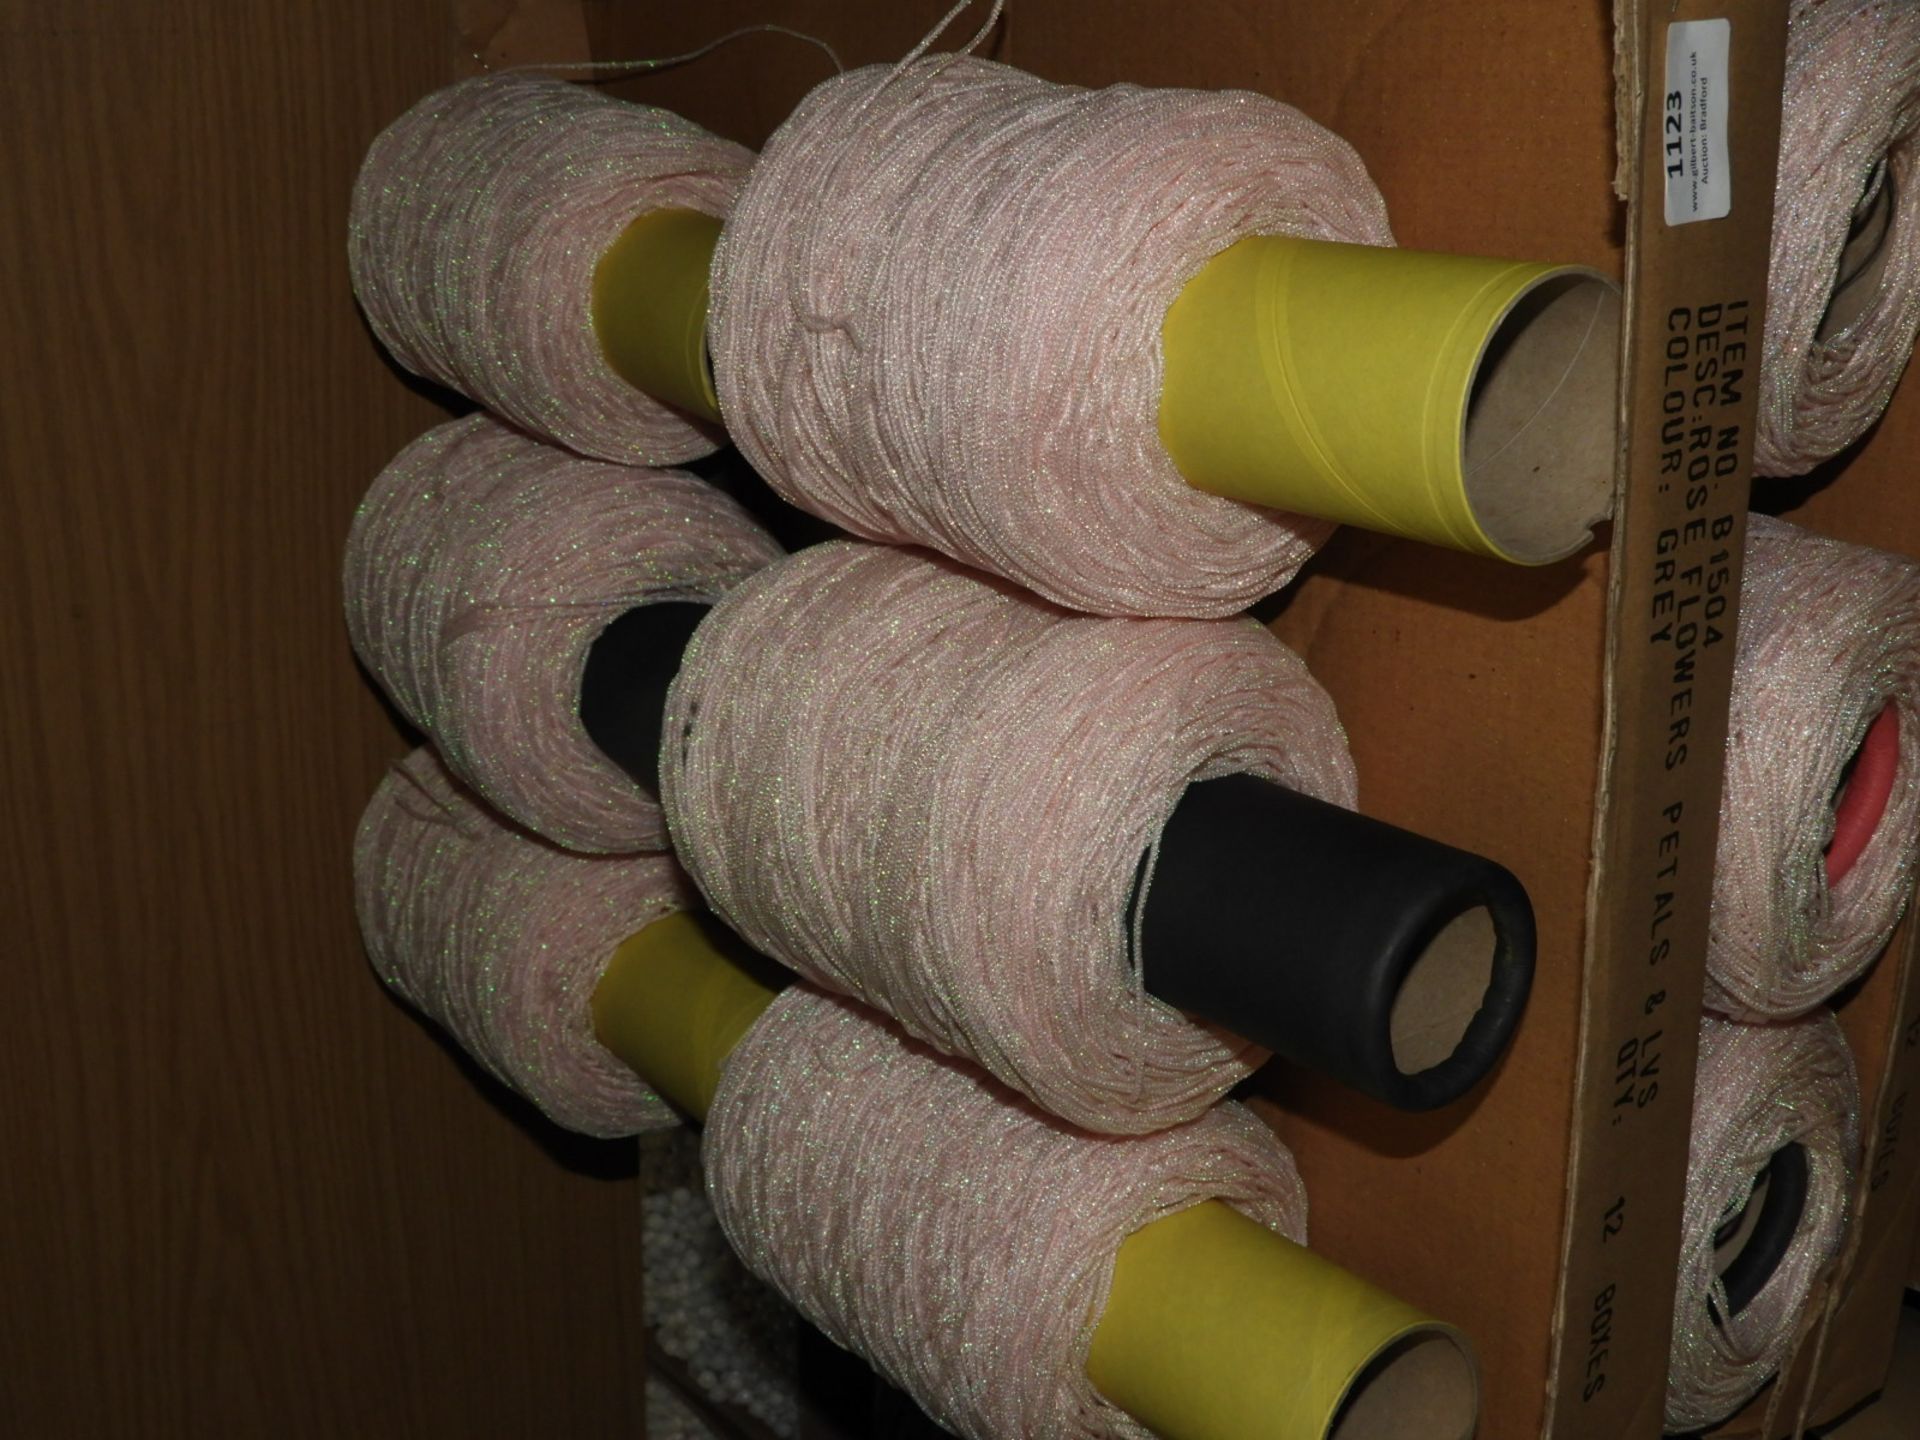 Six Cones of Knitting Wool